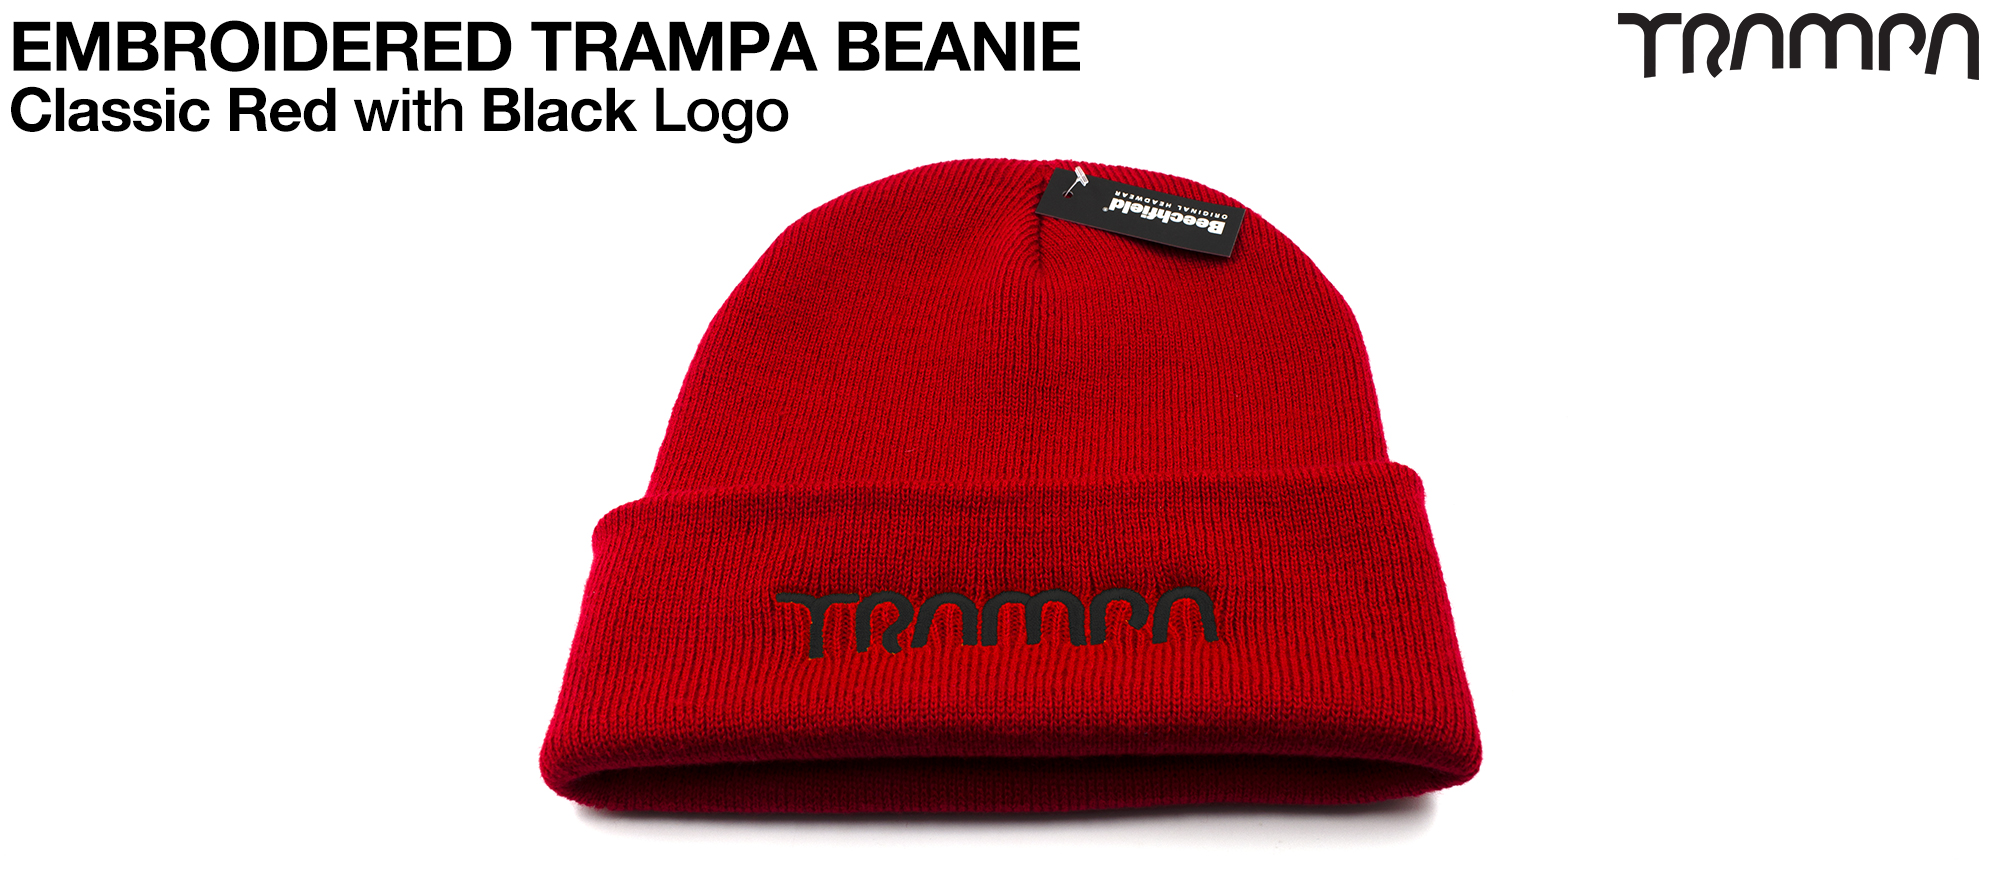 Classic RED Woolly hat with BLACK embroidered TRAMPA logo - Double thick turn over for extra warmth